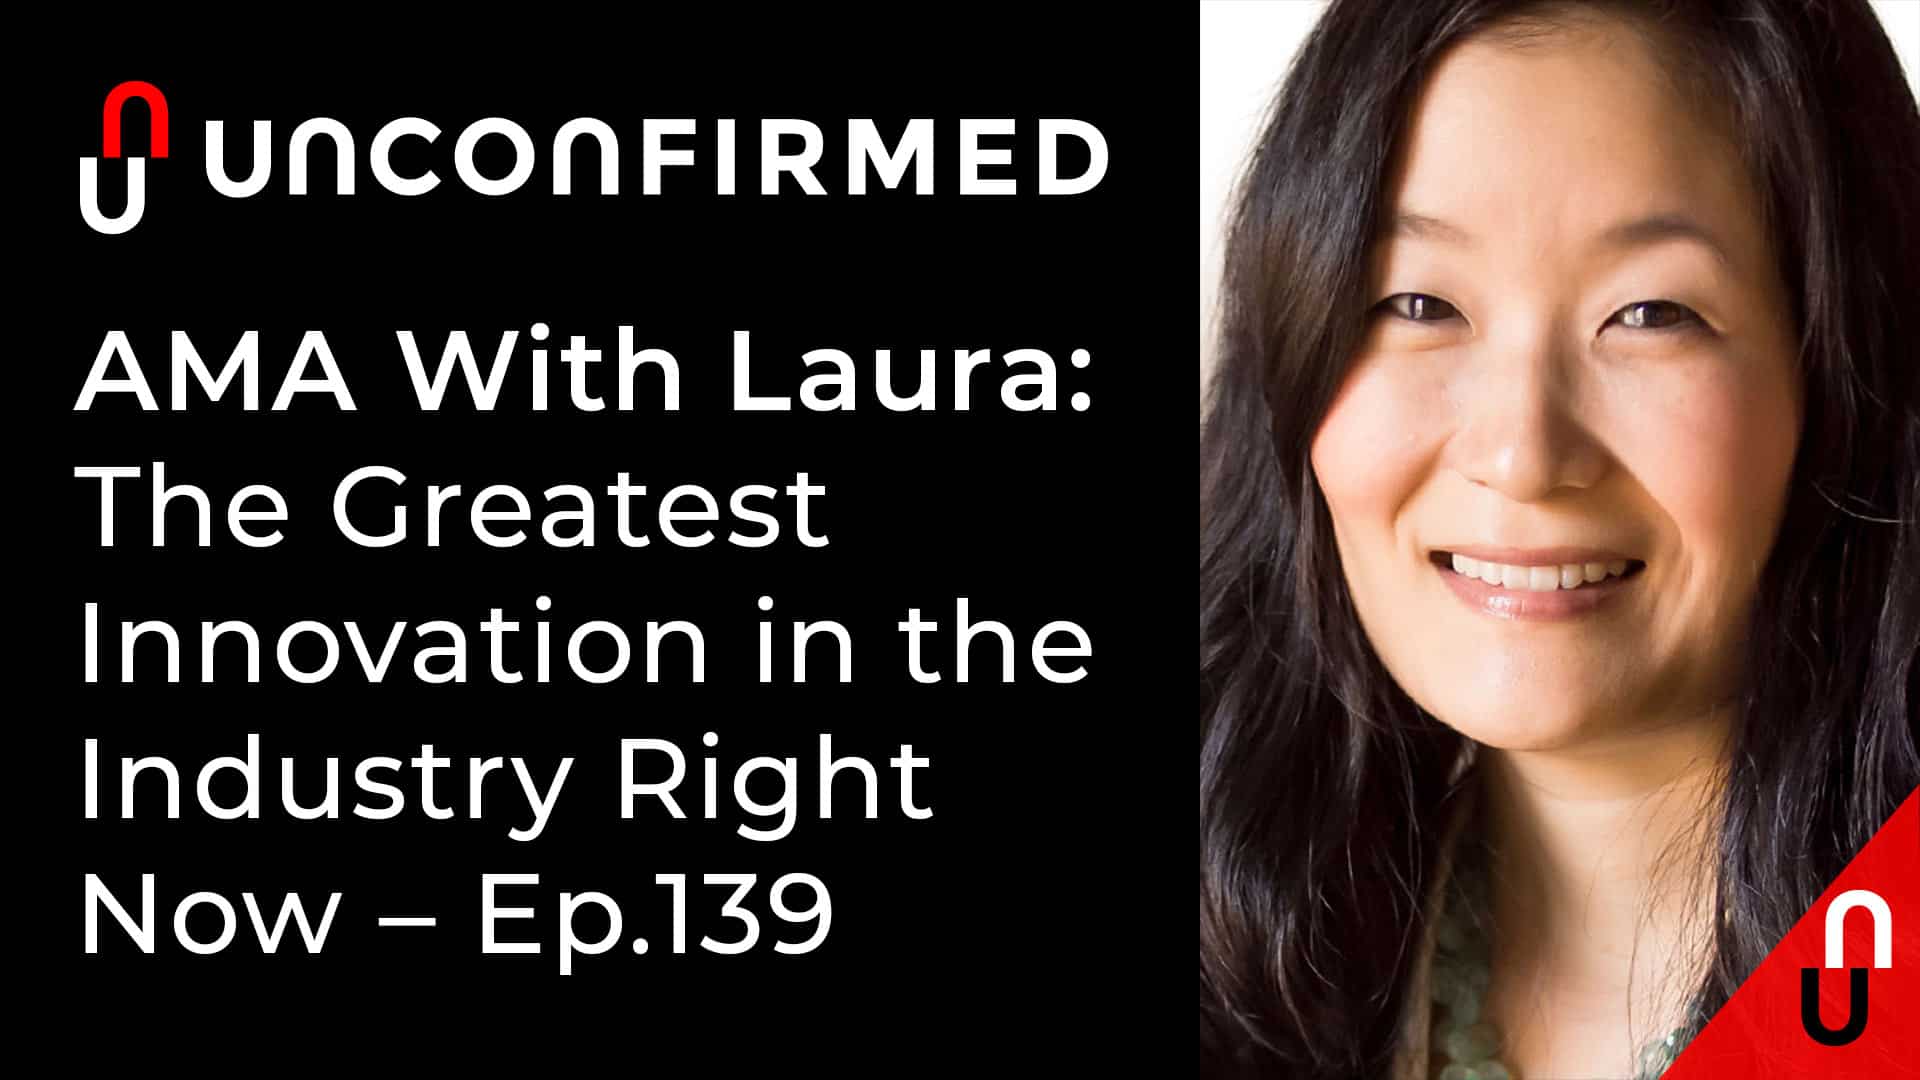 Unconfirmed - Ep.139 - AMA With Laura - The Greatest Innovation in the Industry Right Now